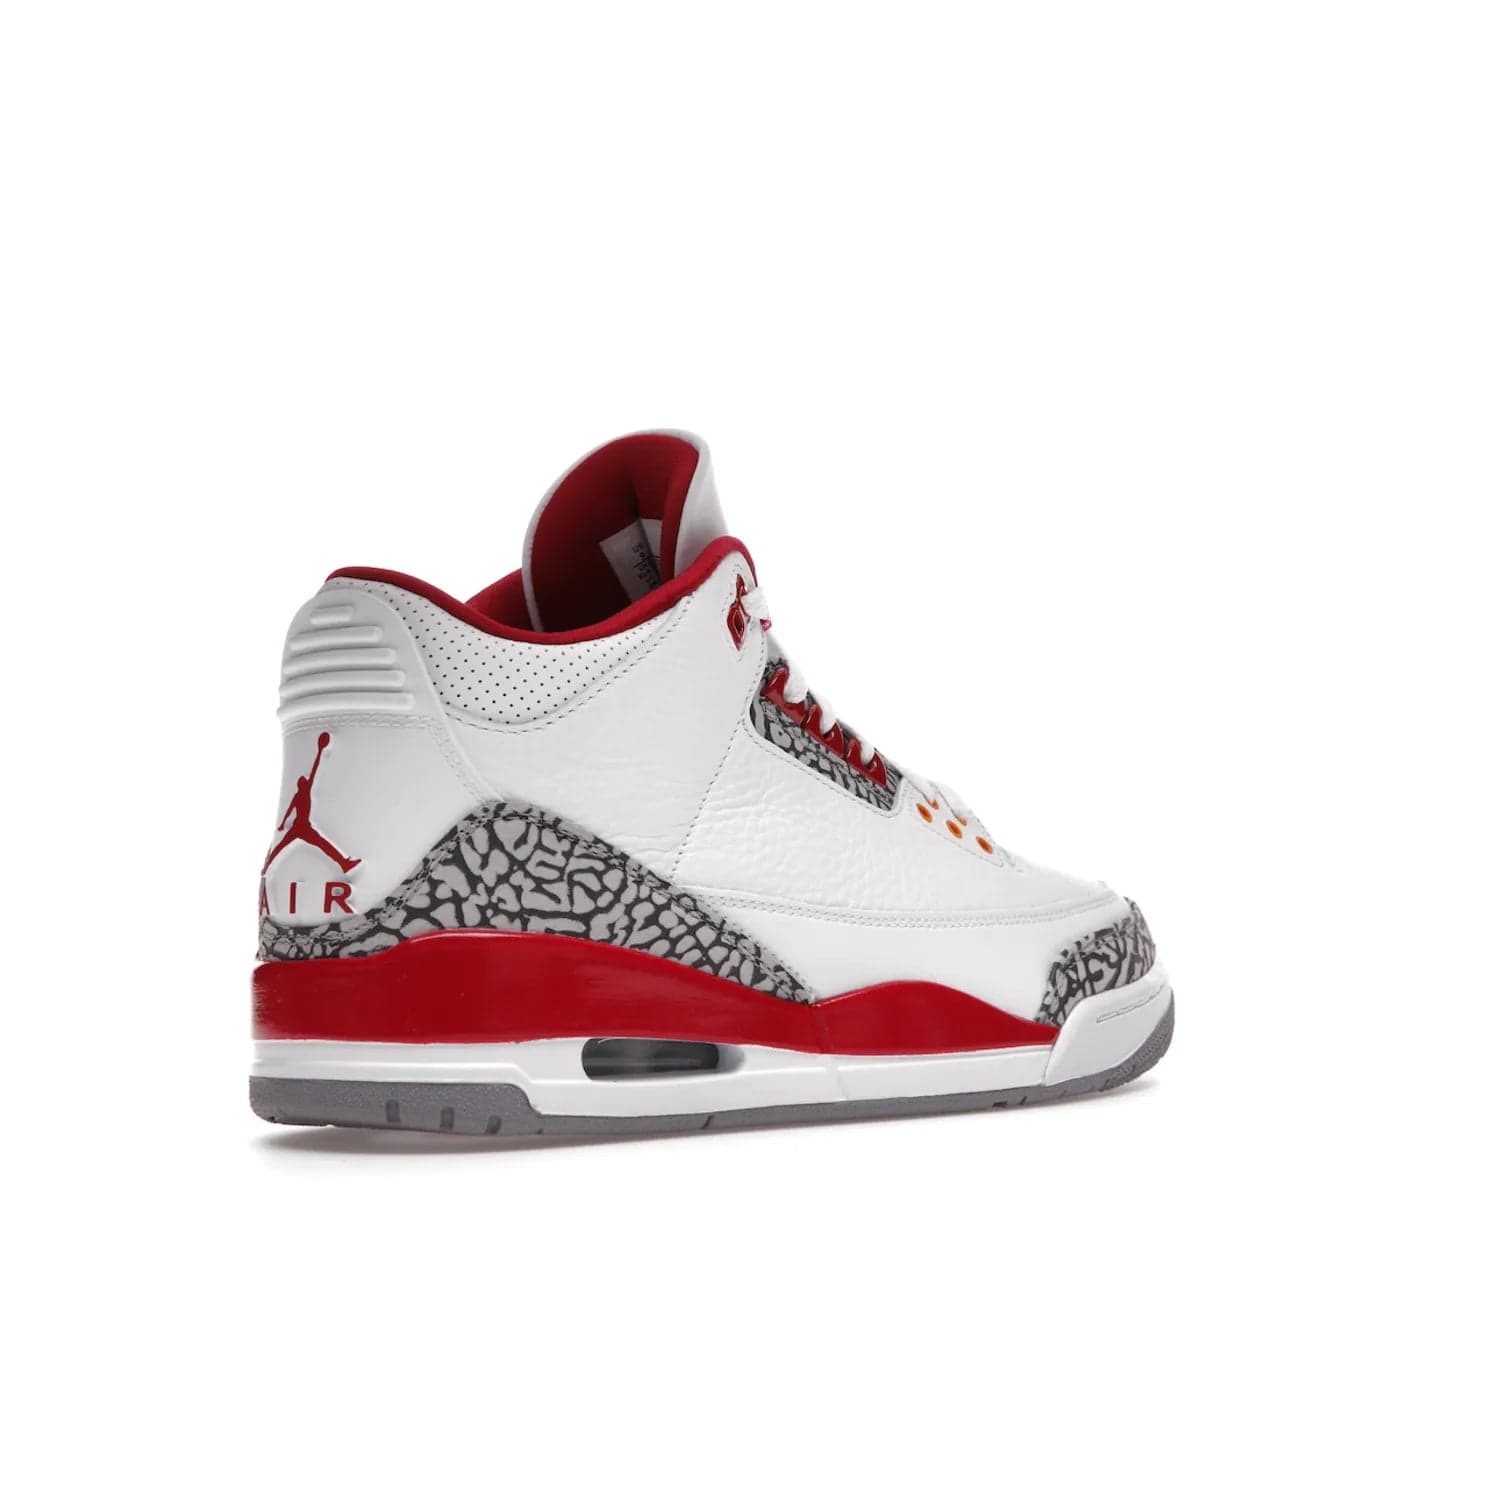 Jordan 3 Retro Cardinal Red - Image 33 - Only at www.BallersClubKickz.com - Air Jordan 3 Retro Cardinal Red combines classic style and modern appeal - white tumbled leather, signature Elephant Print overlays, cardinal red midsoles, Jumpman logo embroidery. Available Feb 2022.